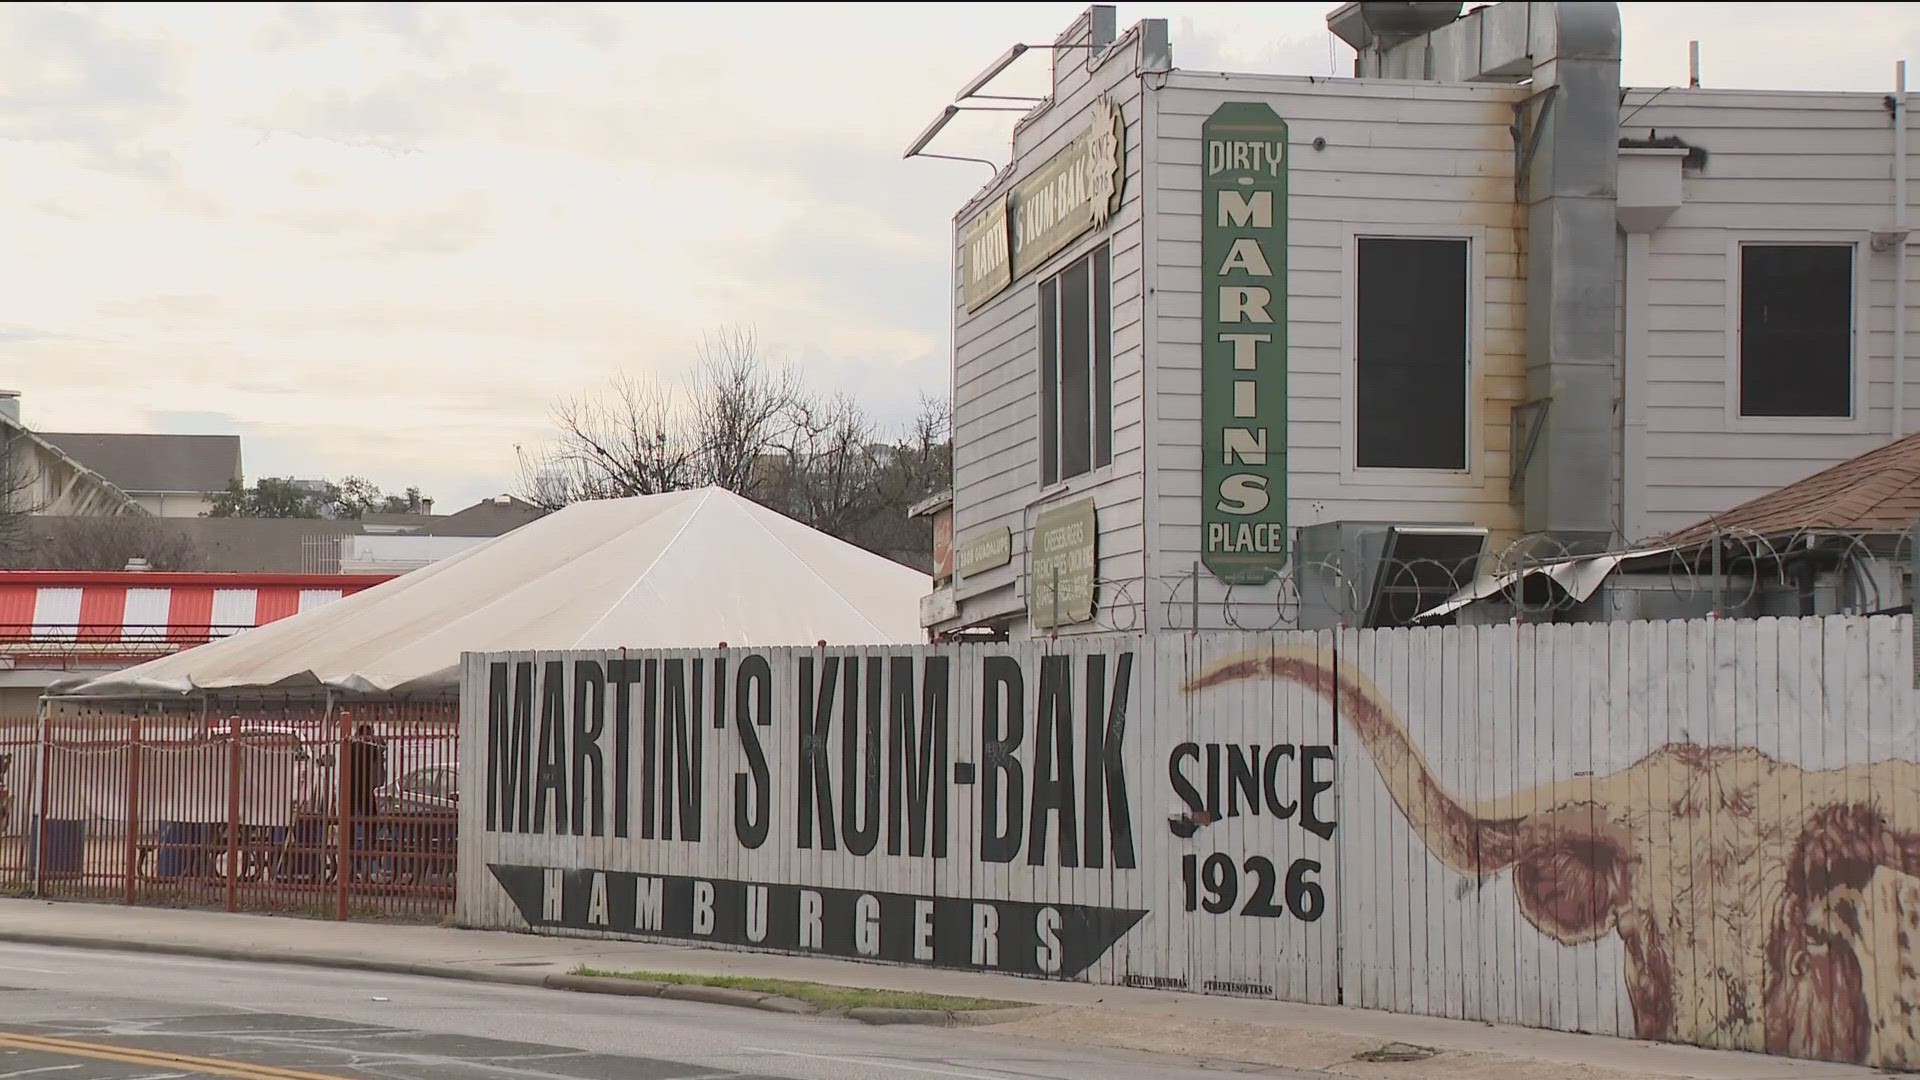 Dirty Martin's Place and members of the community have been pushing back on the Project Connect light rail plan for nearly two years.